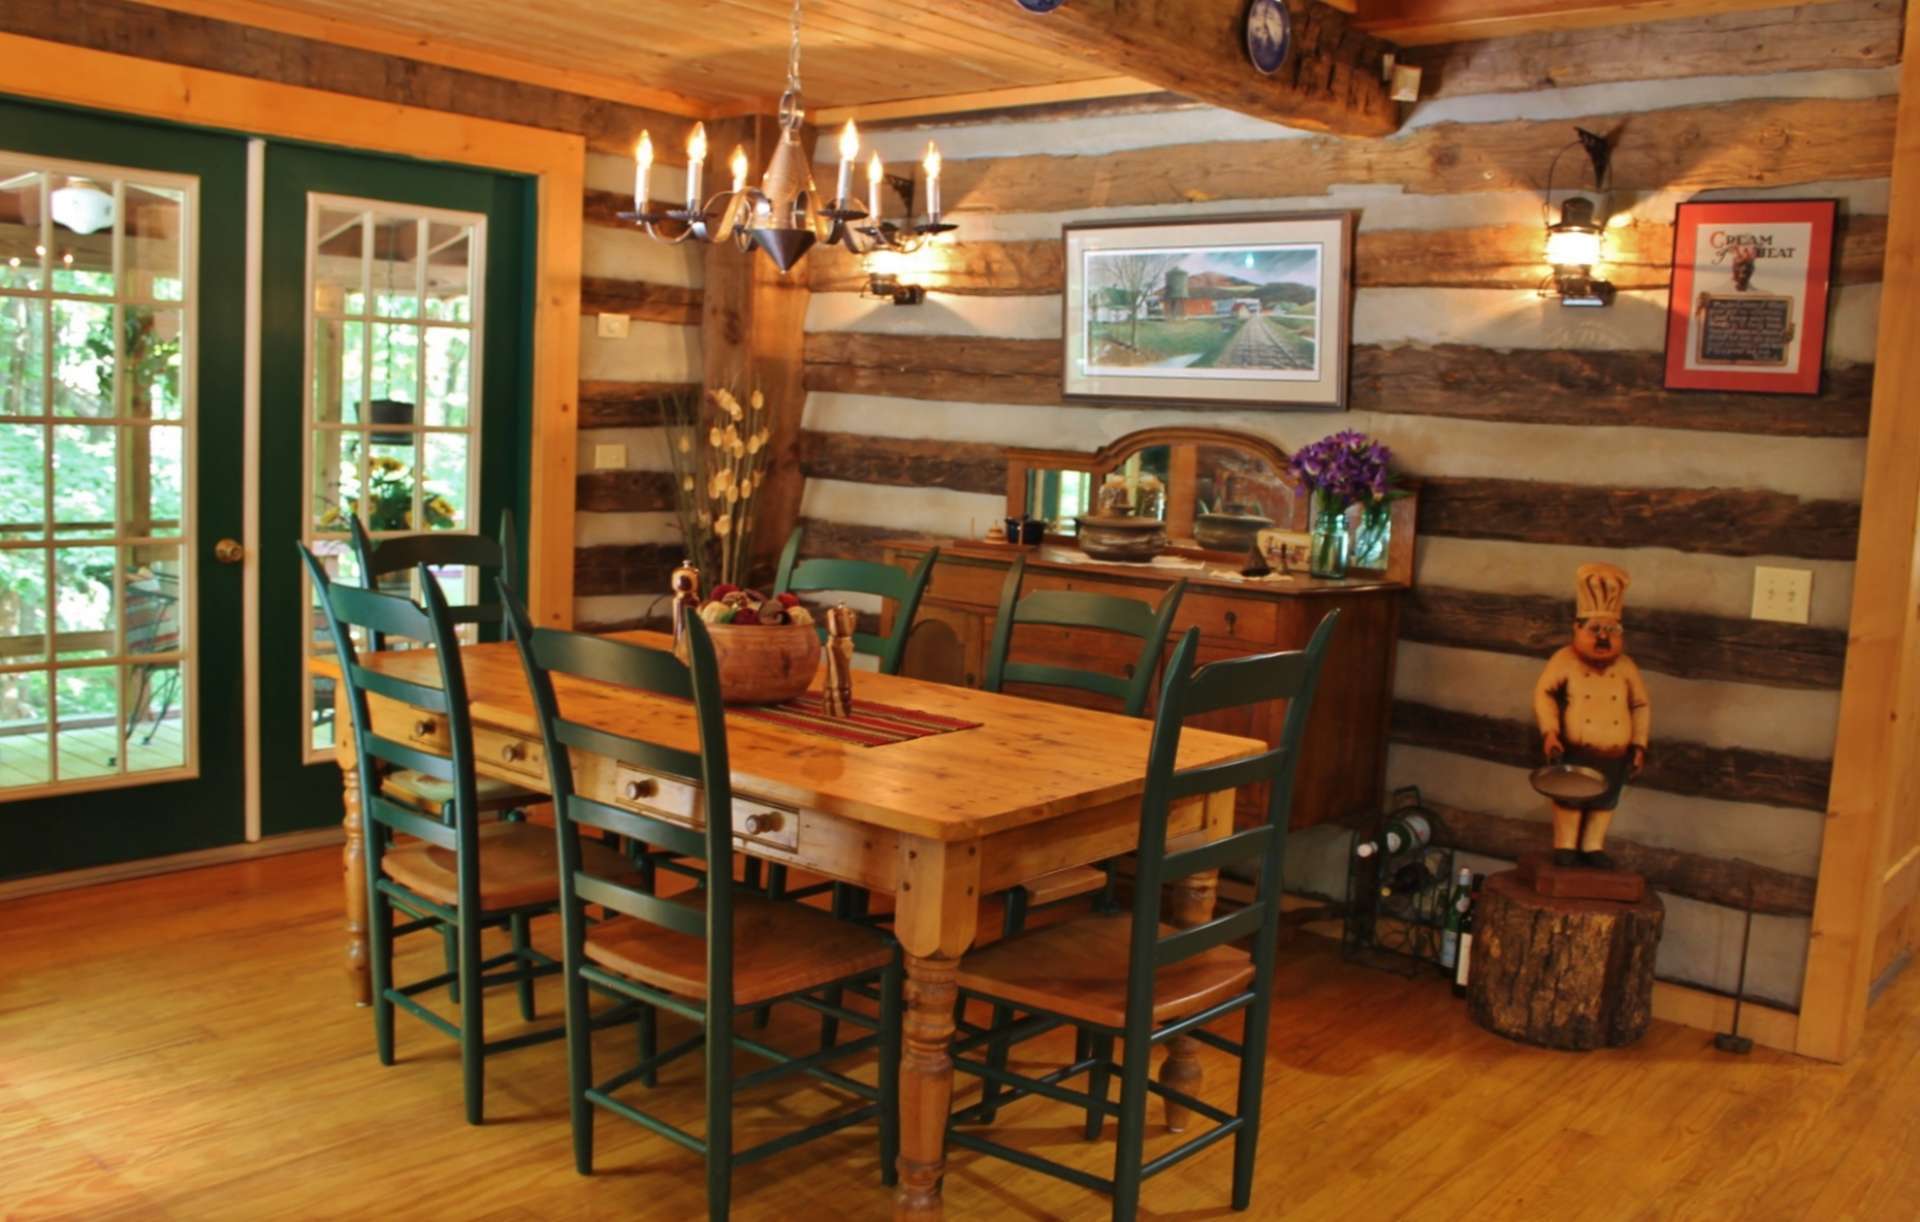 Enjoy family meals in the dining area which also opens to covered screened porch.